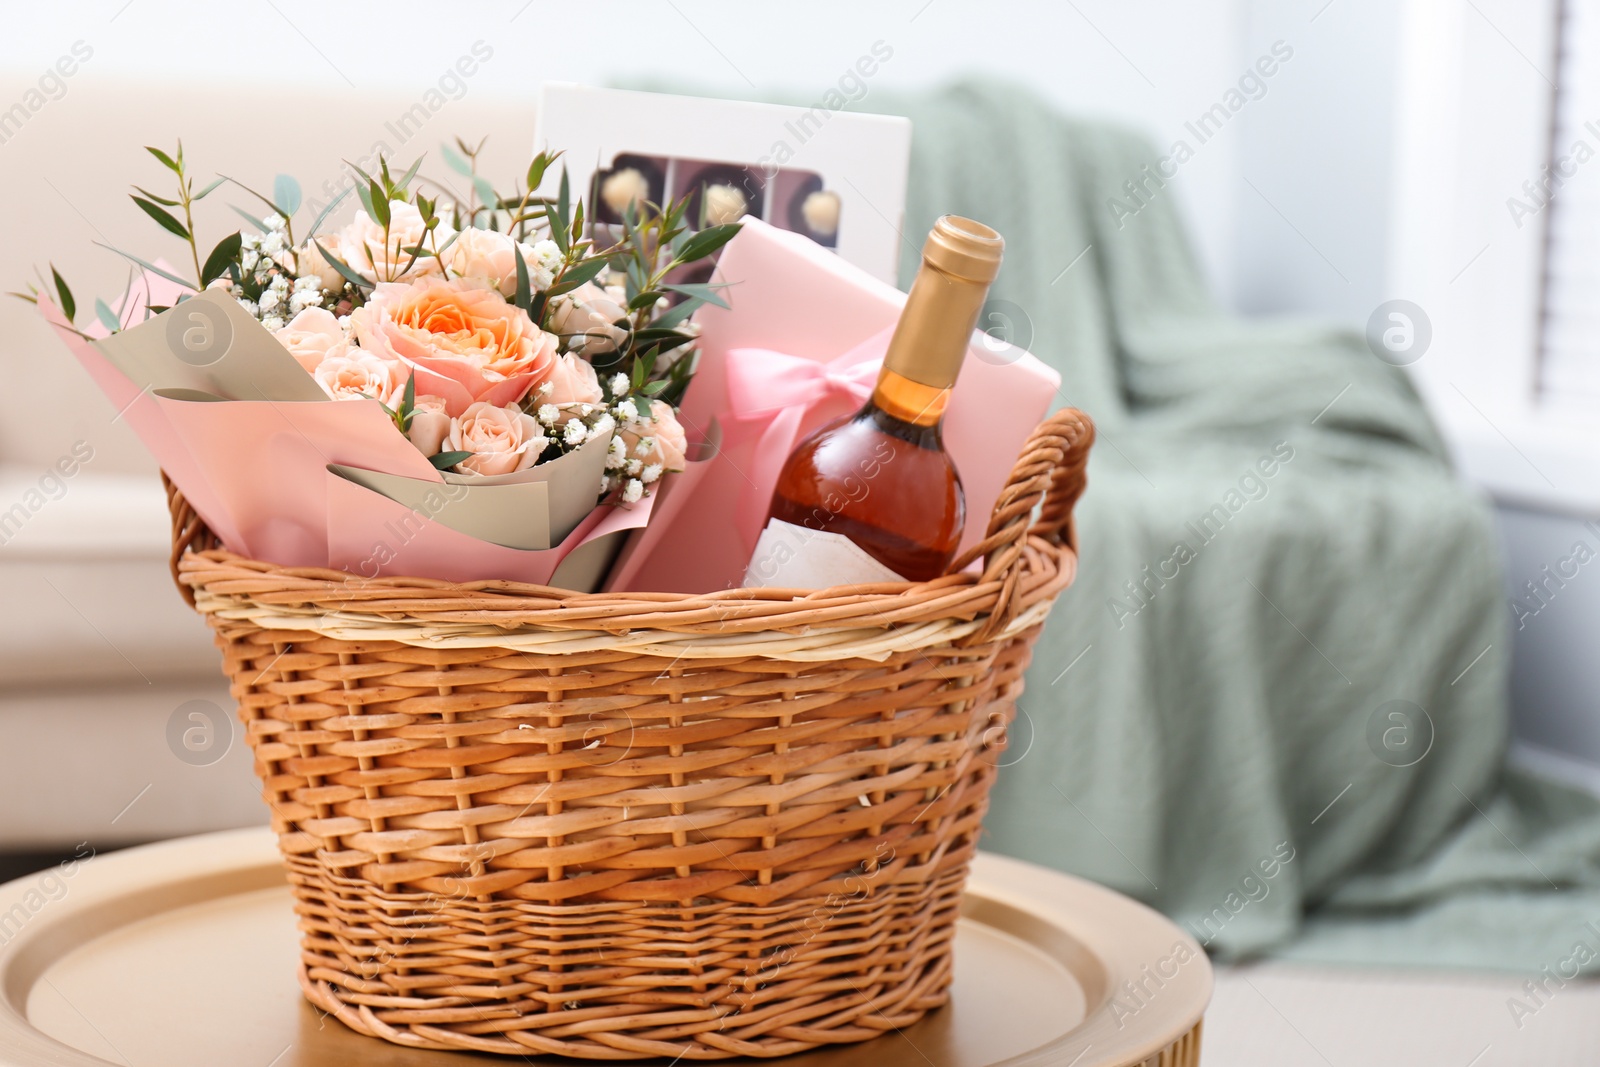 Photo of Wicker basket with gifts on table indoors